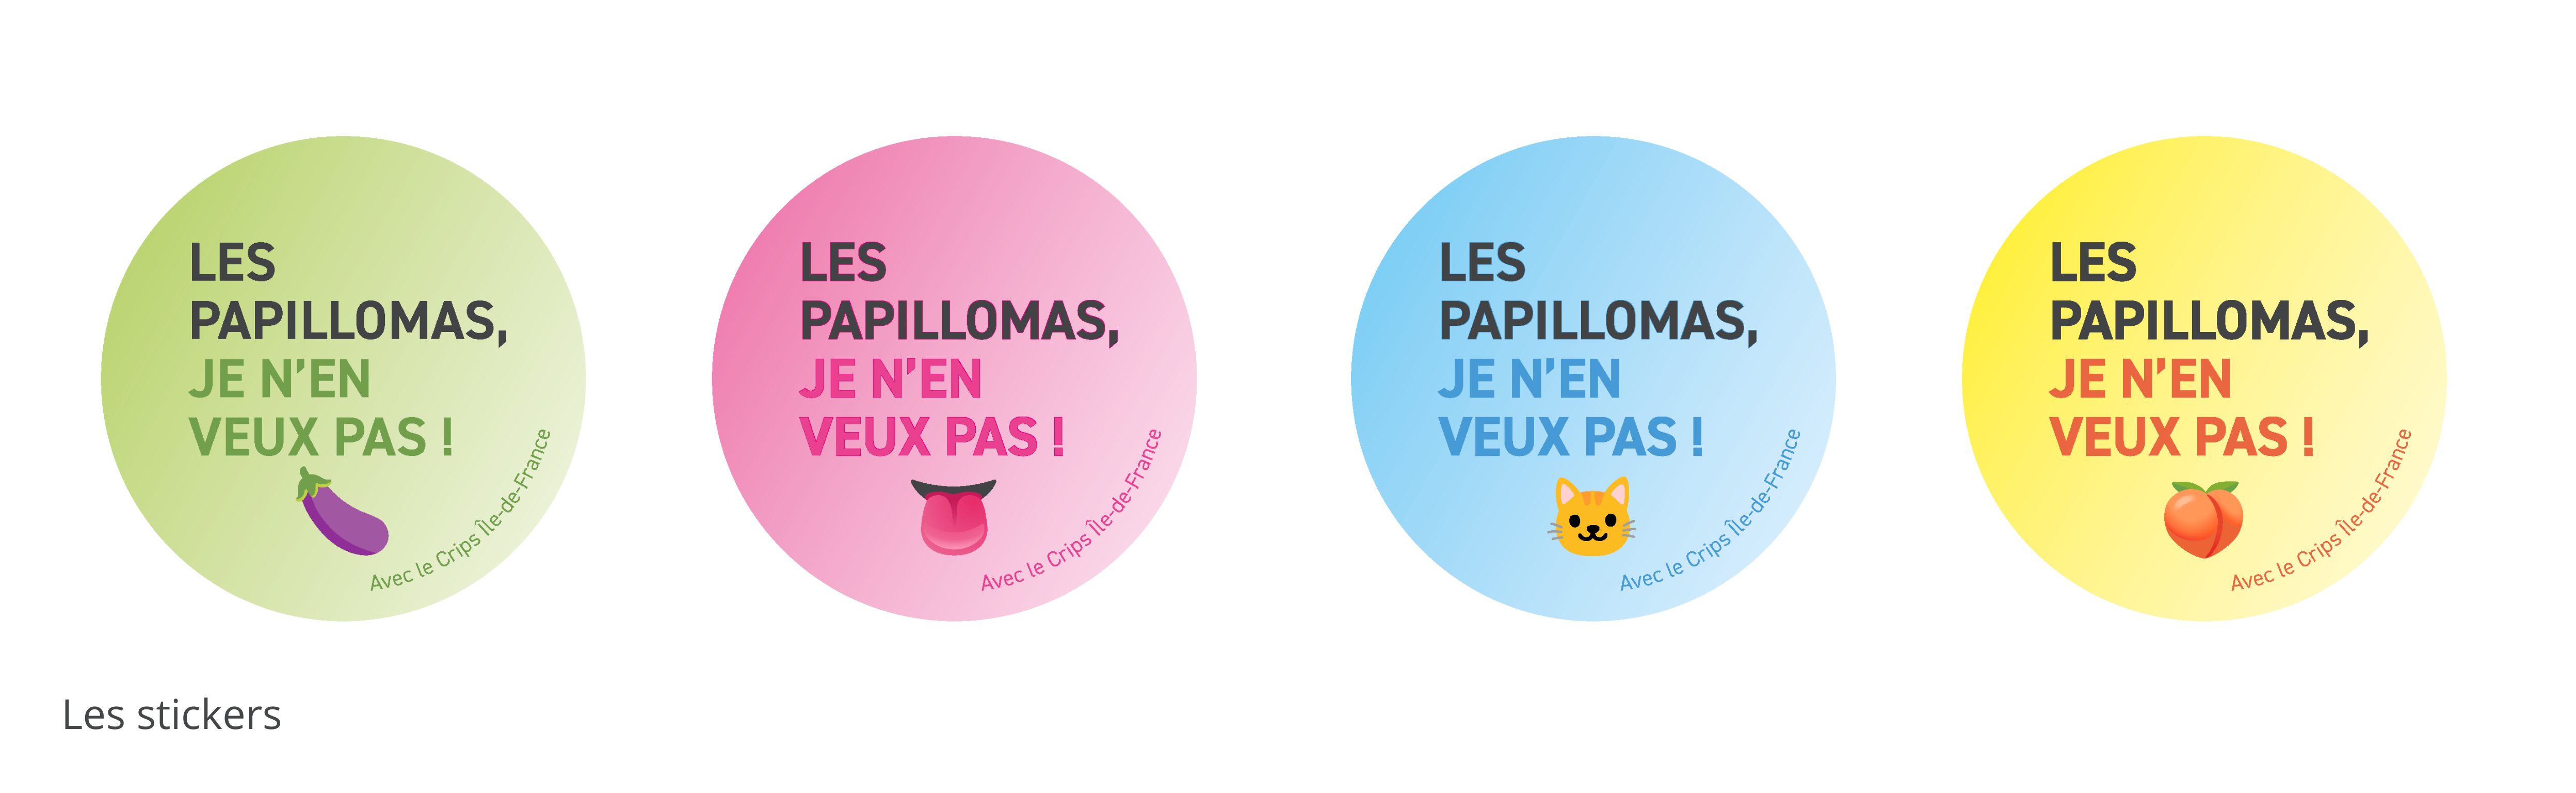 crips-campagne-papillomas-stickers-2023